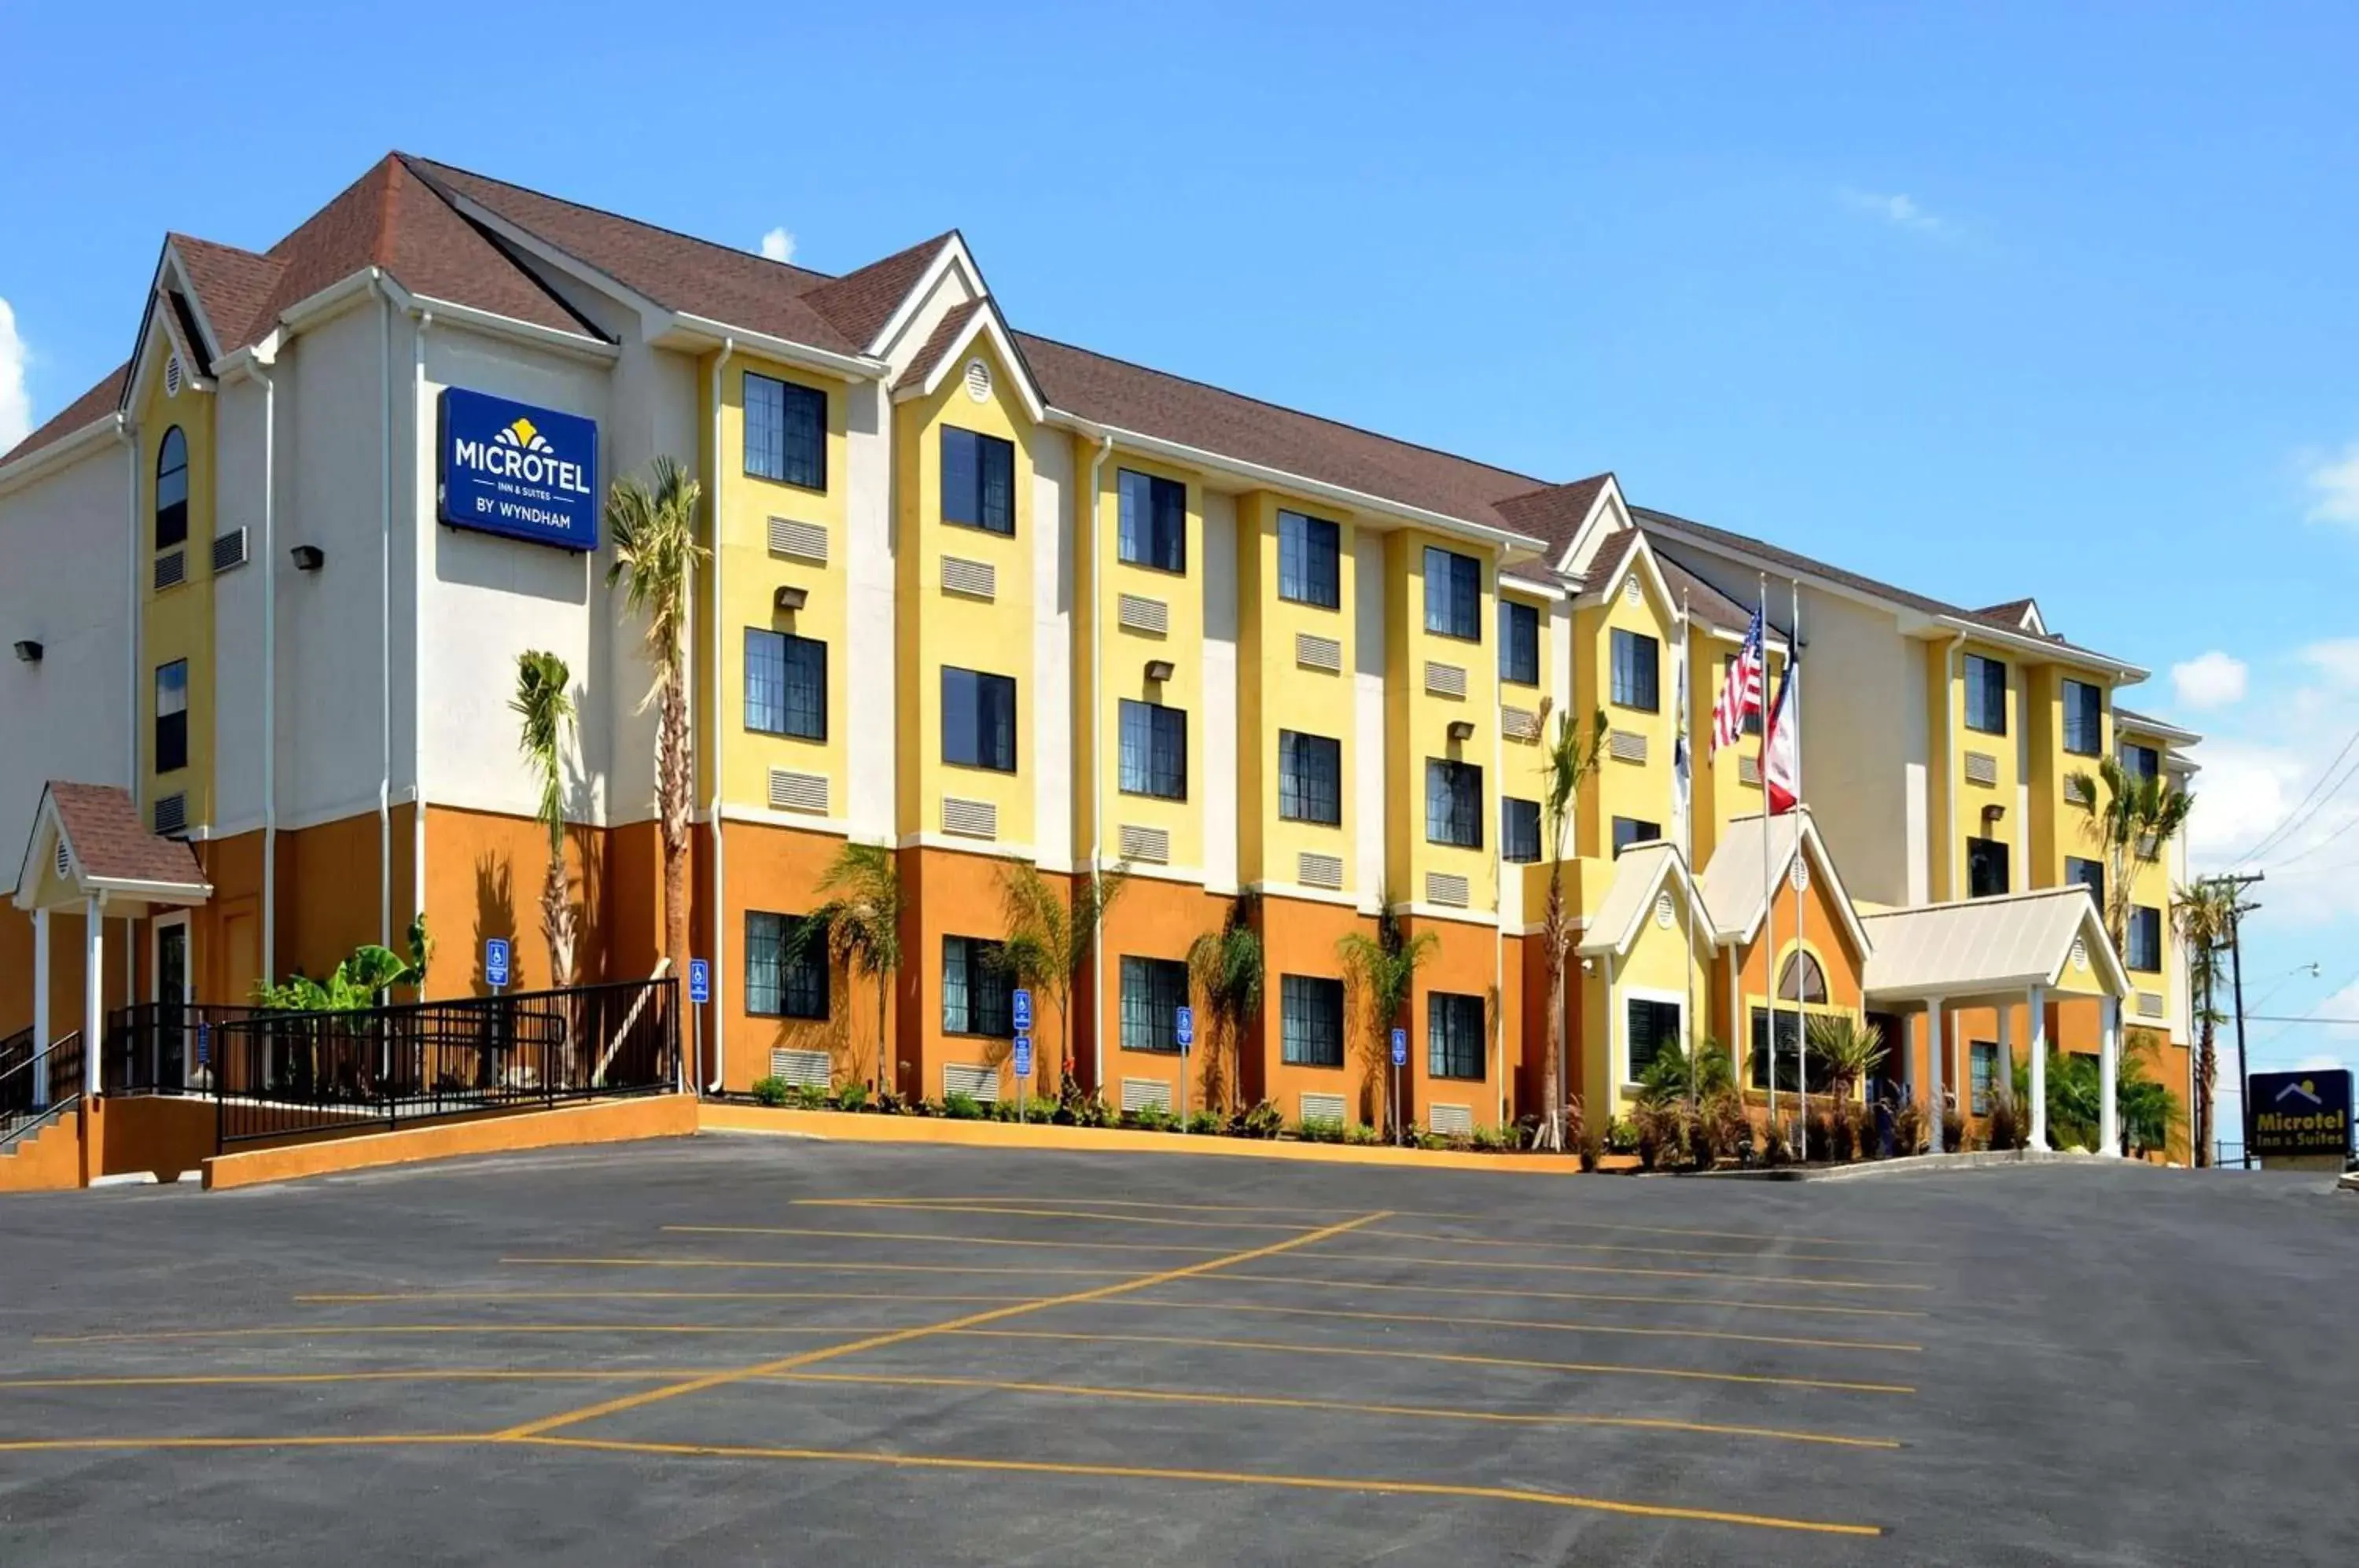 Property Building in Microtel Inn & Suites by Wyndham New Braunfels I-35